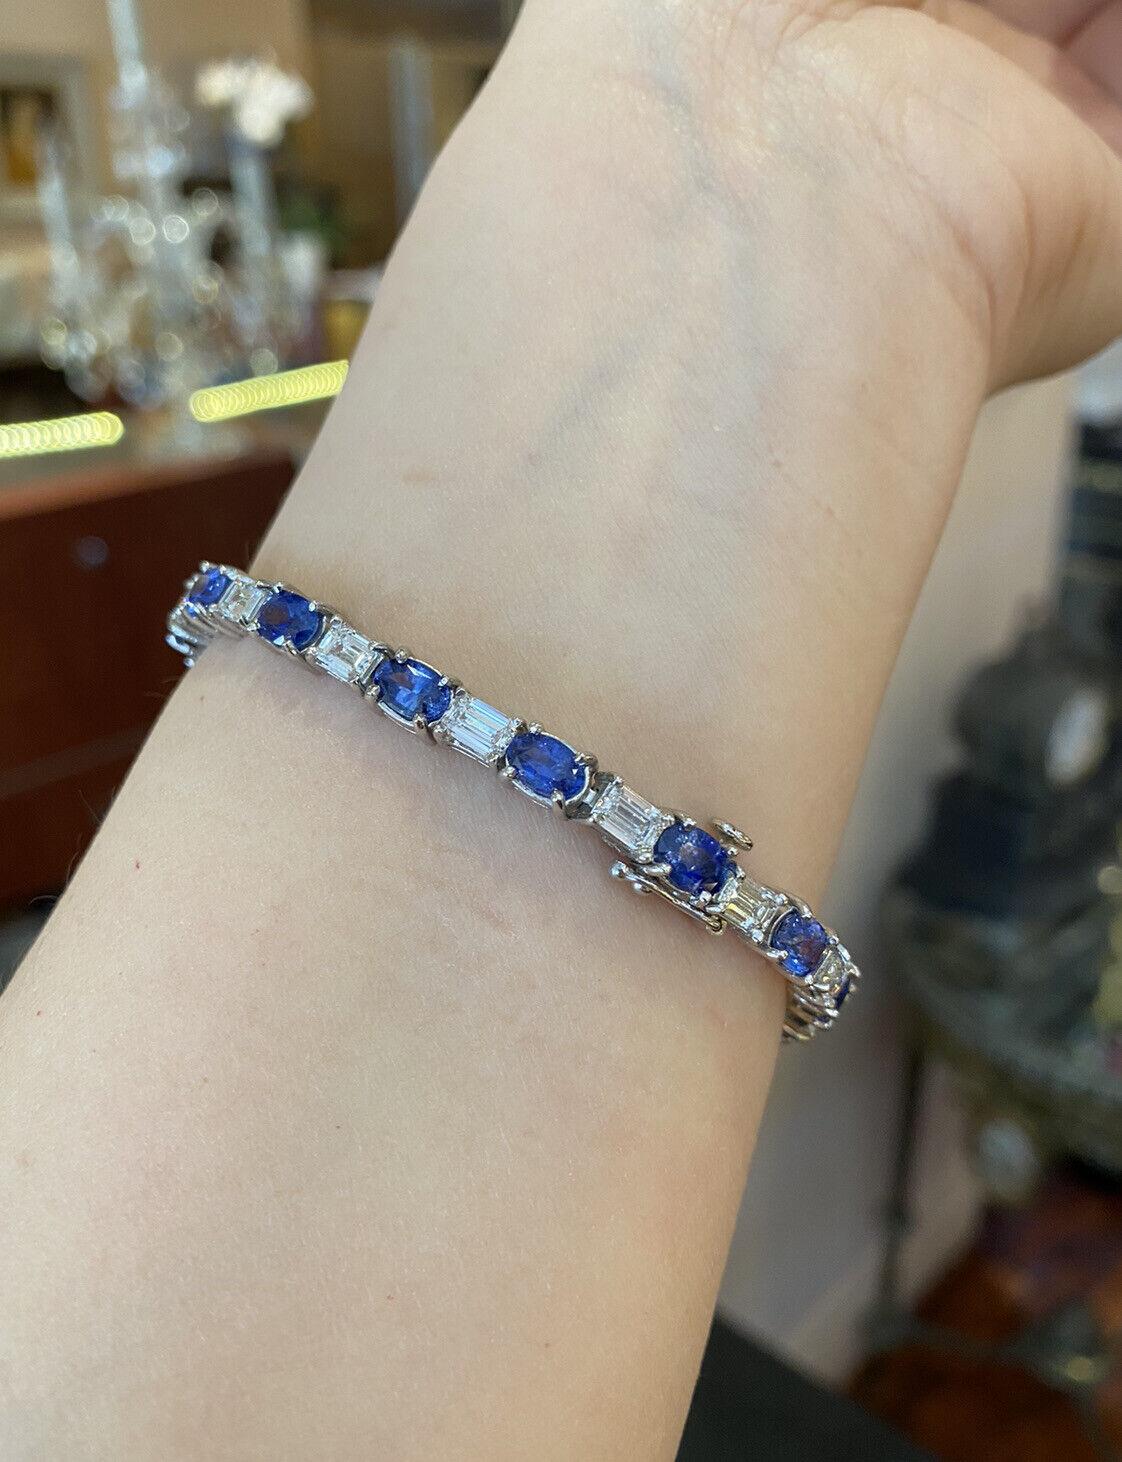 Sapphire and Diamond Line Tennis Bracelet in Platinum

Sapphire and Diamond Line Bracelet features Sixteen Oval Sapphires of medium blue color and Sixteen Emerald Cut Diamonds set in Platinum. 

Total sapphire weight is 9.60 carats.
Total diamond